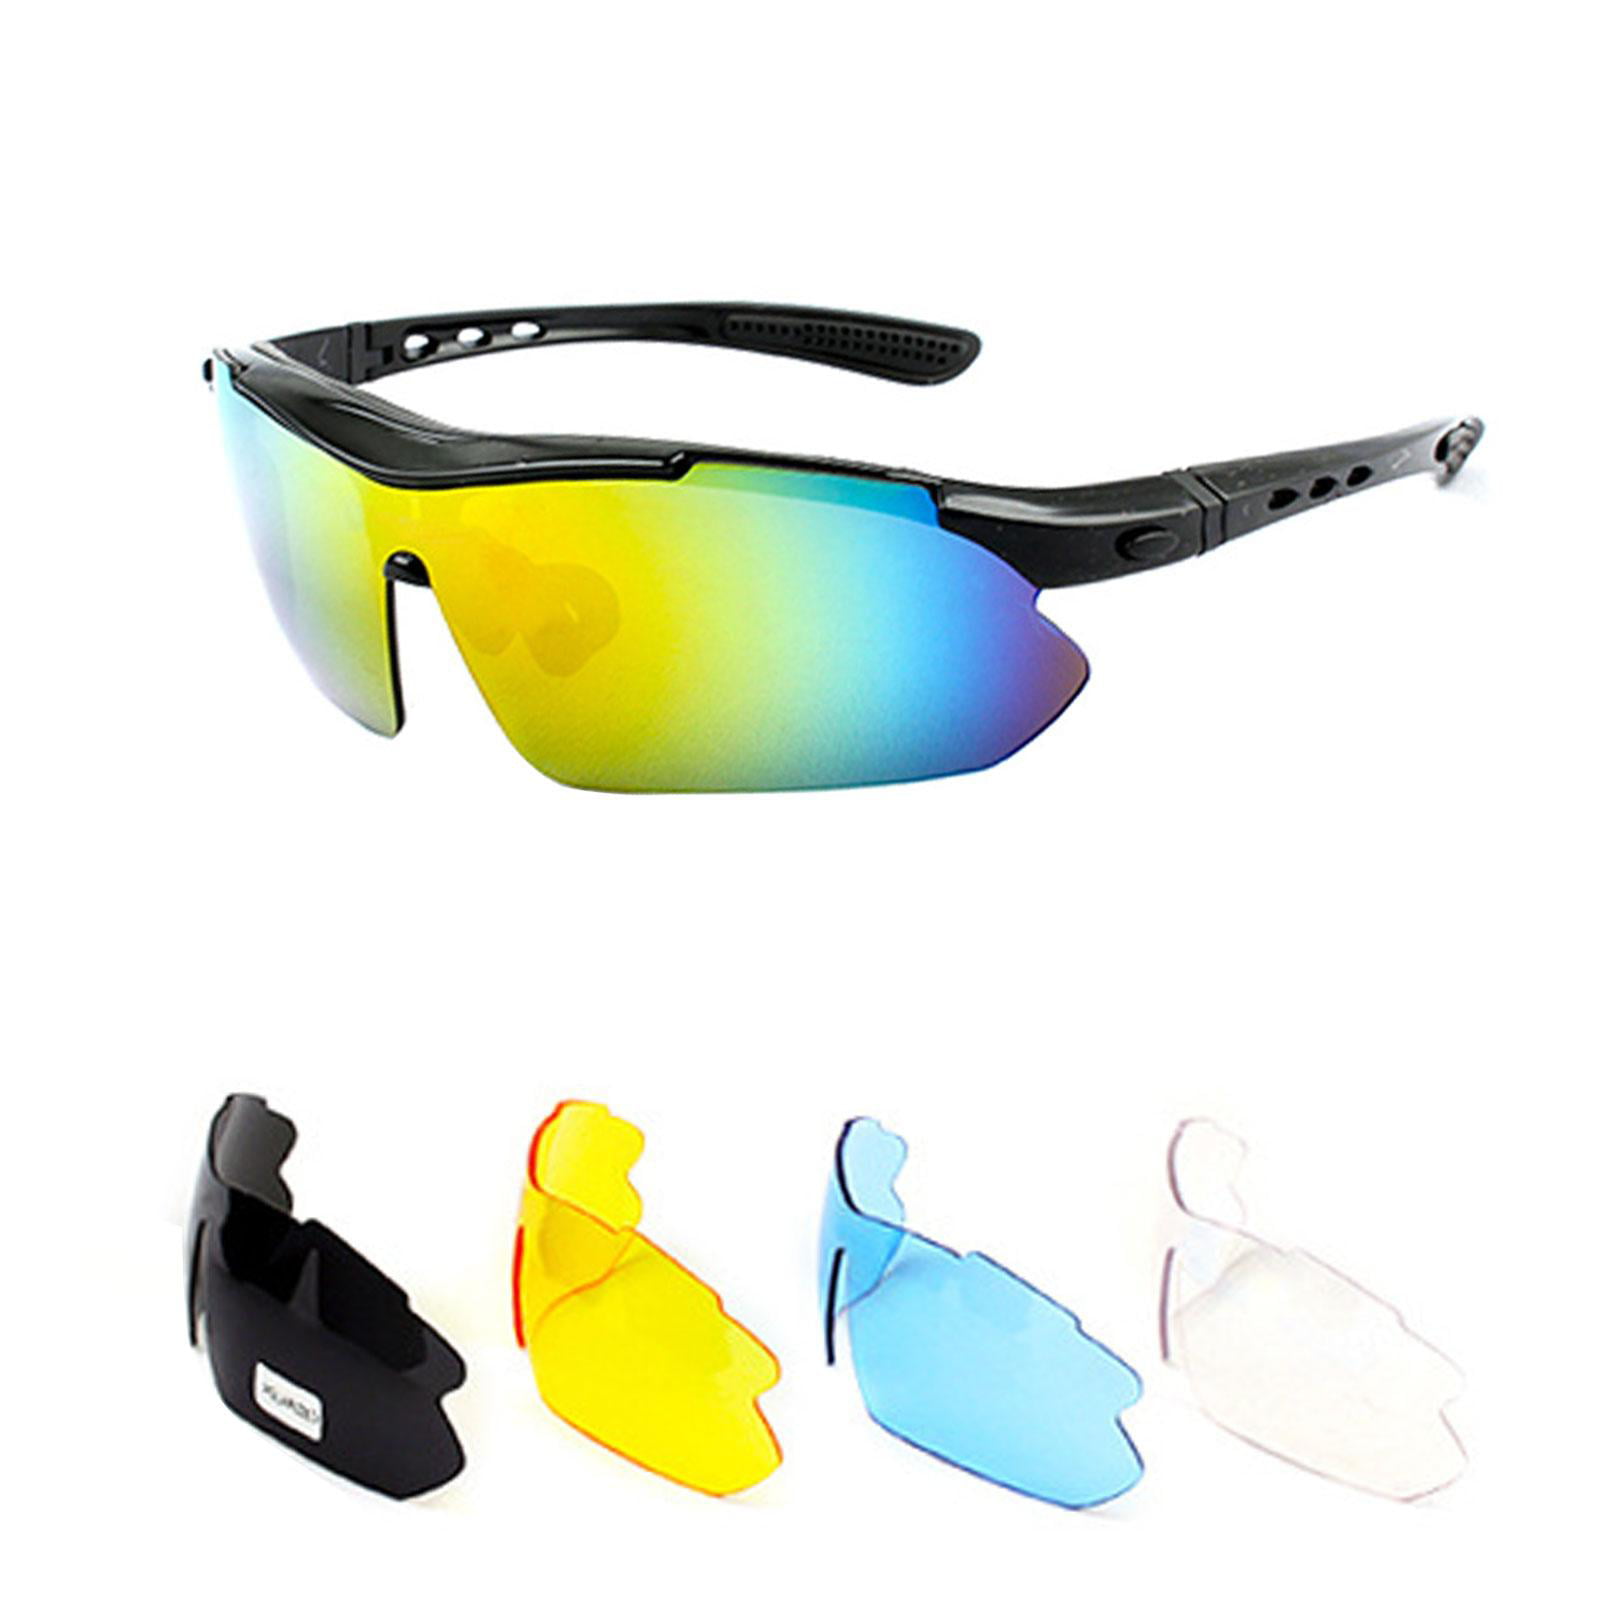 Details about   Professional Polarized Cycling Glasses Bike Bicycle Goggles Sports UV400 Protect 